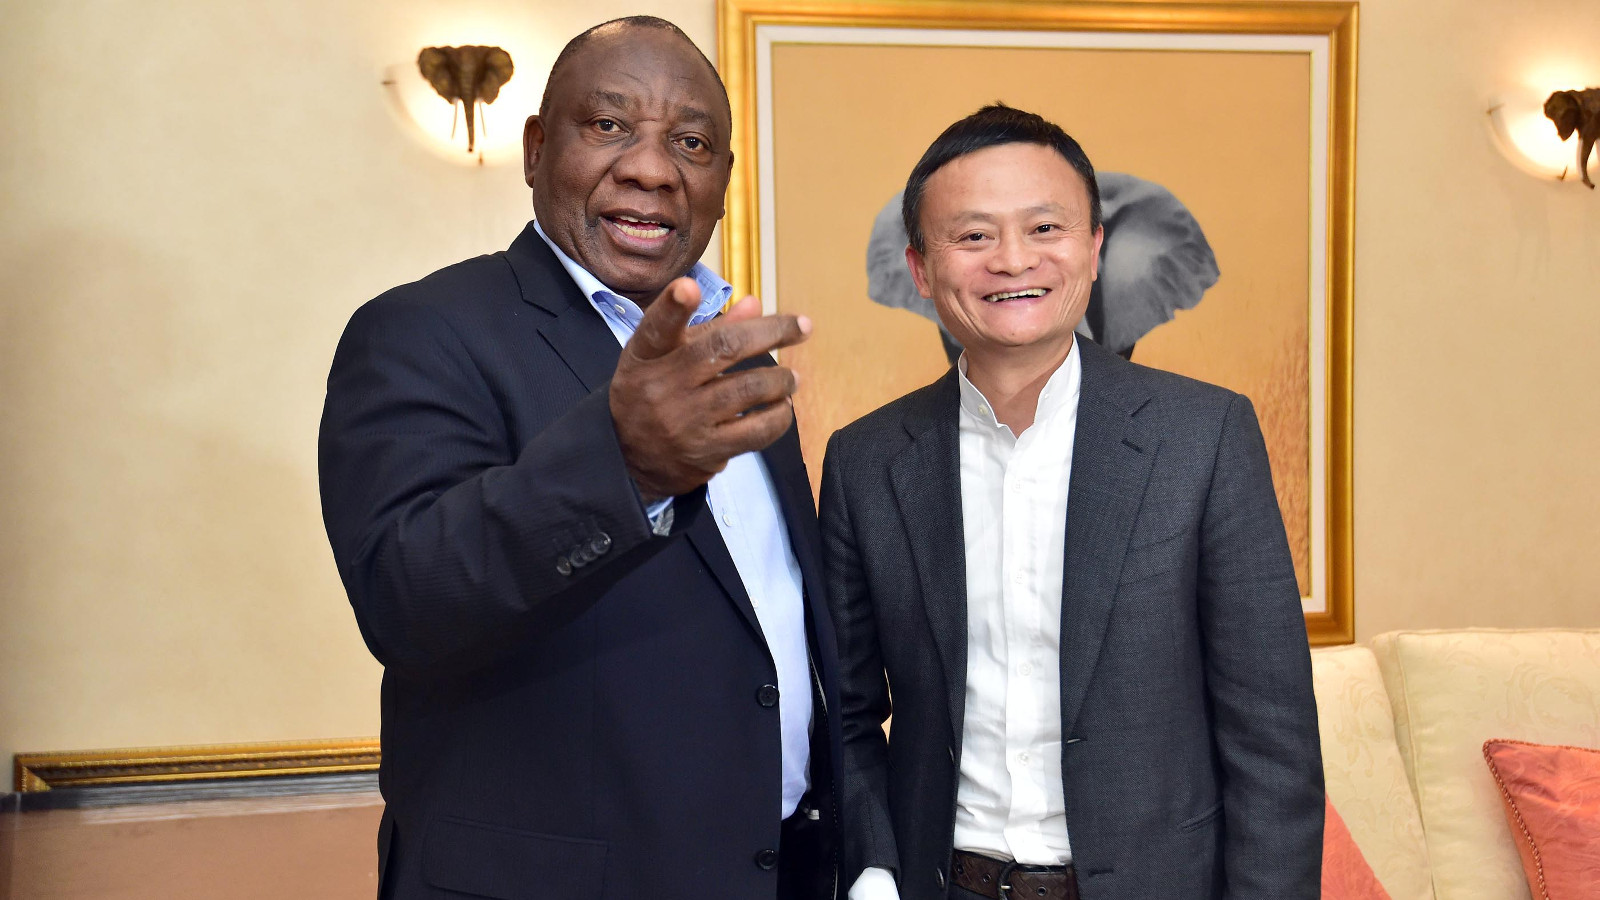 Featured image: President Cyril Ramaphosa receiving a courtesy call from Mr Jack Ma, founder of the Alibaba Group (GovernmentZA via Flickr)